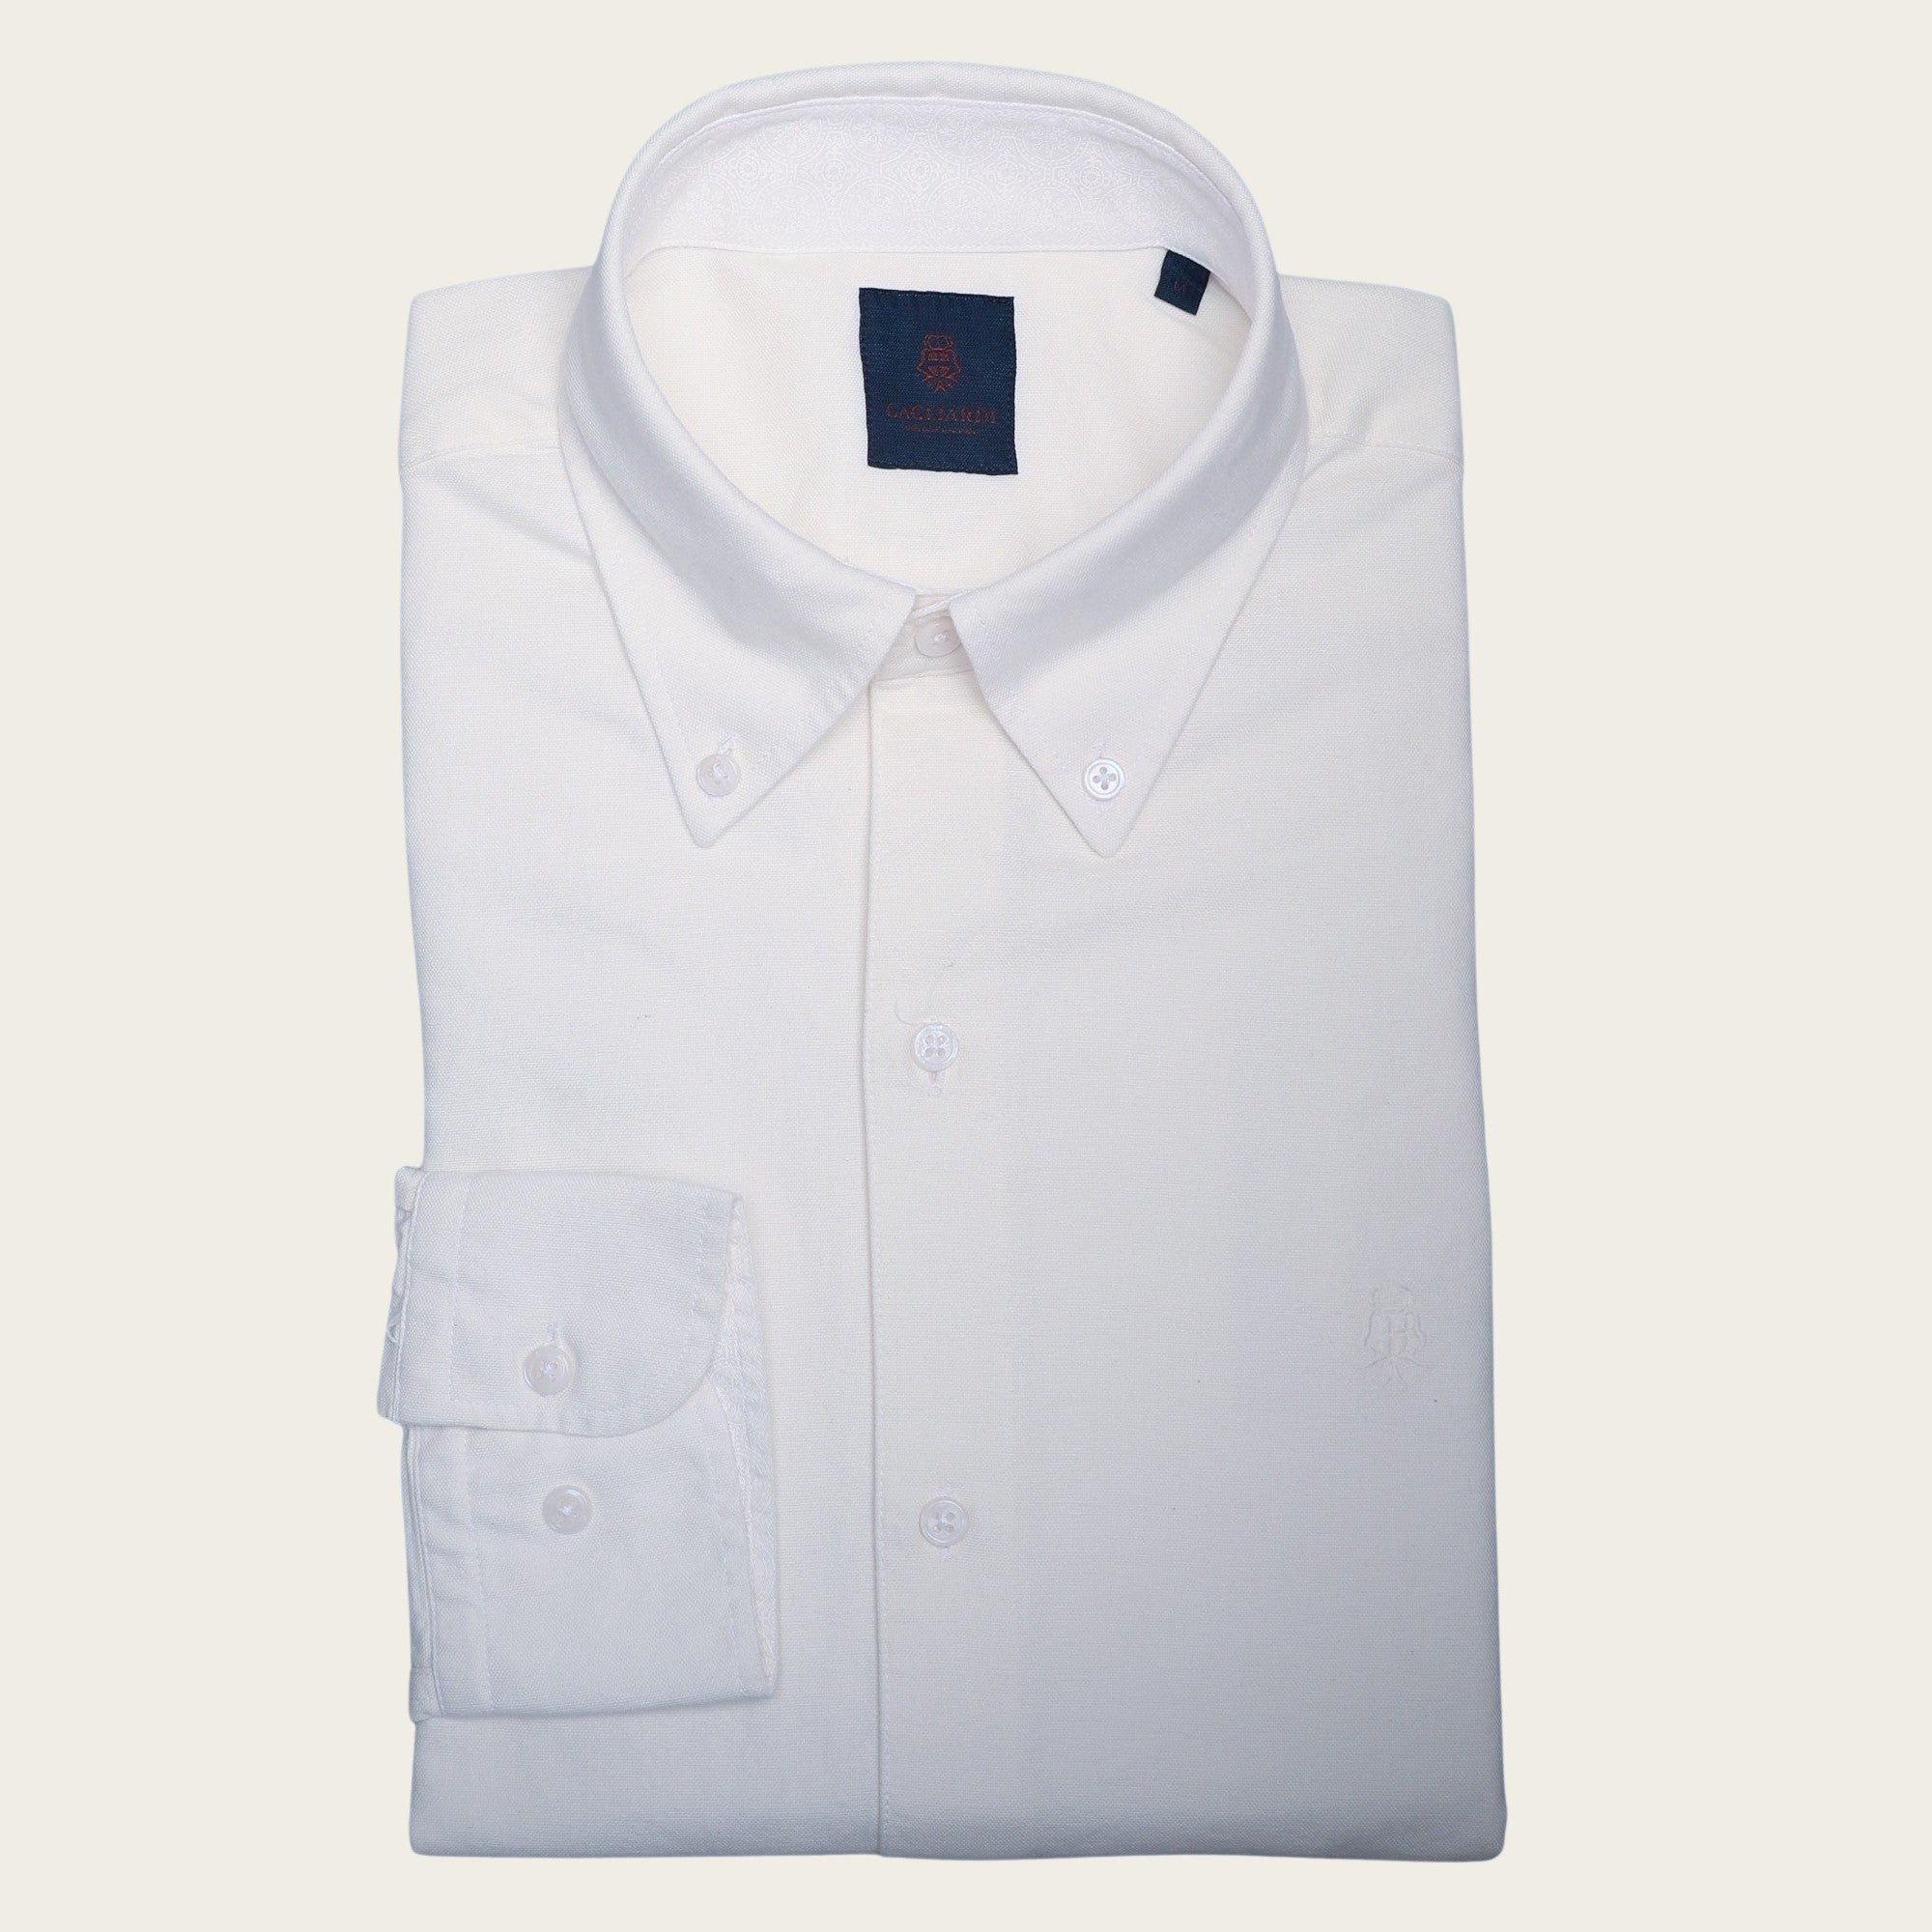 White Tailored Fit Oxford Button Down Shirt